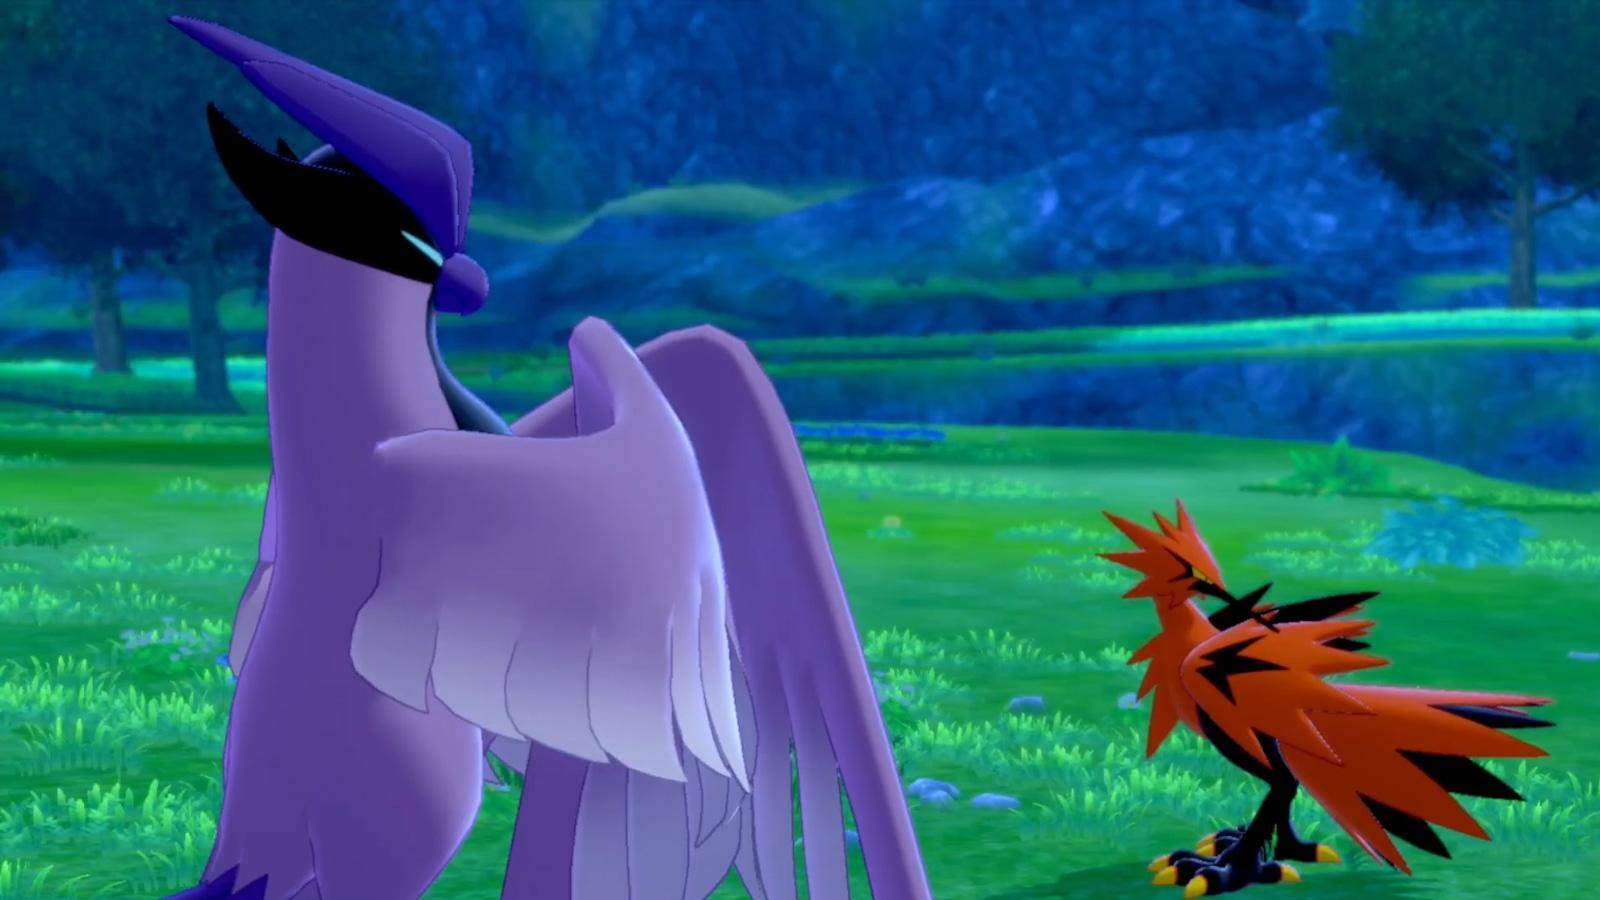 Galarian Articuno and Zapdos as they appear in Pokemon Sword & Shield DLC.